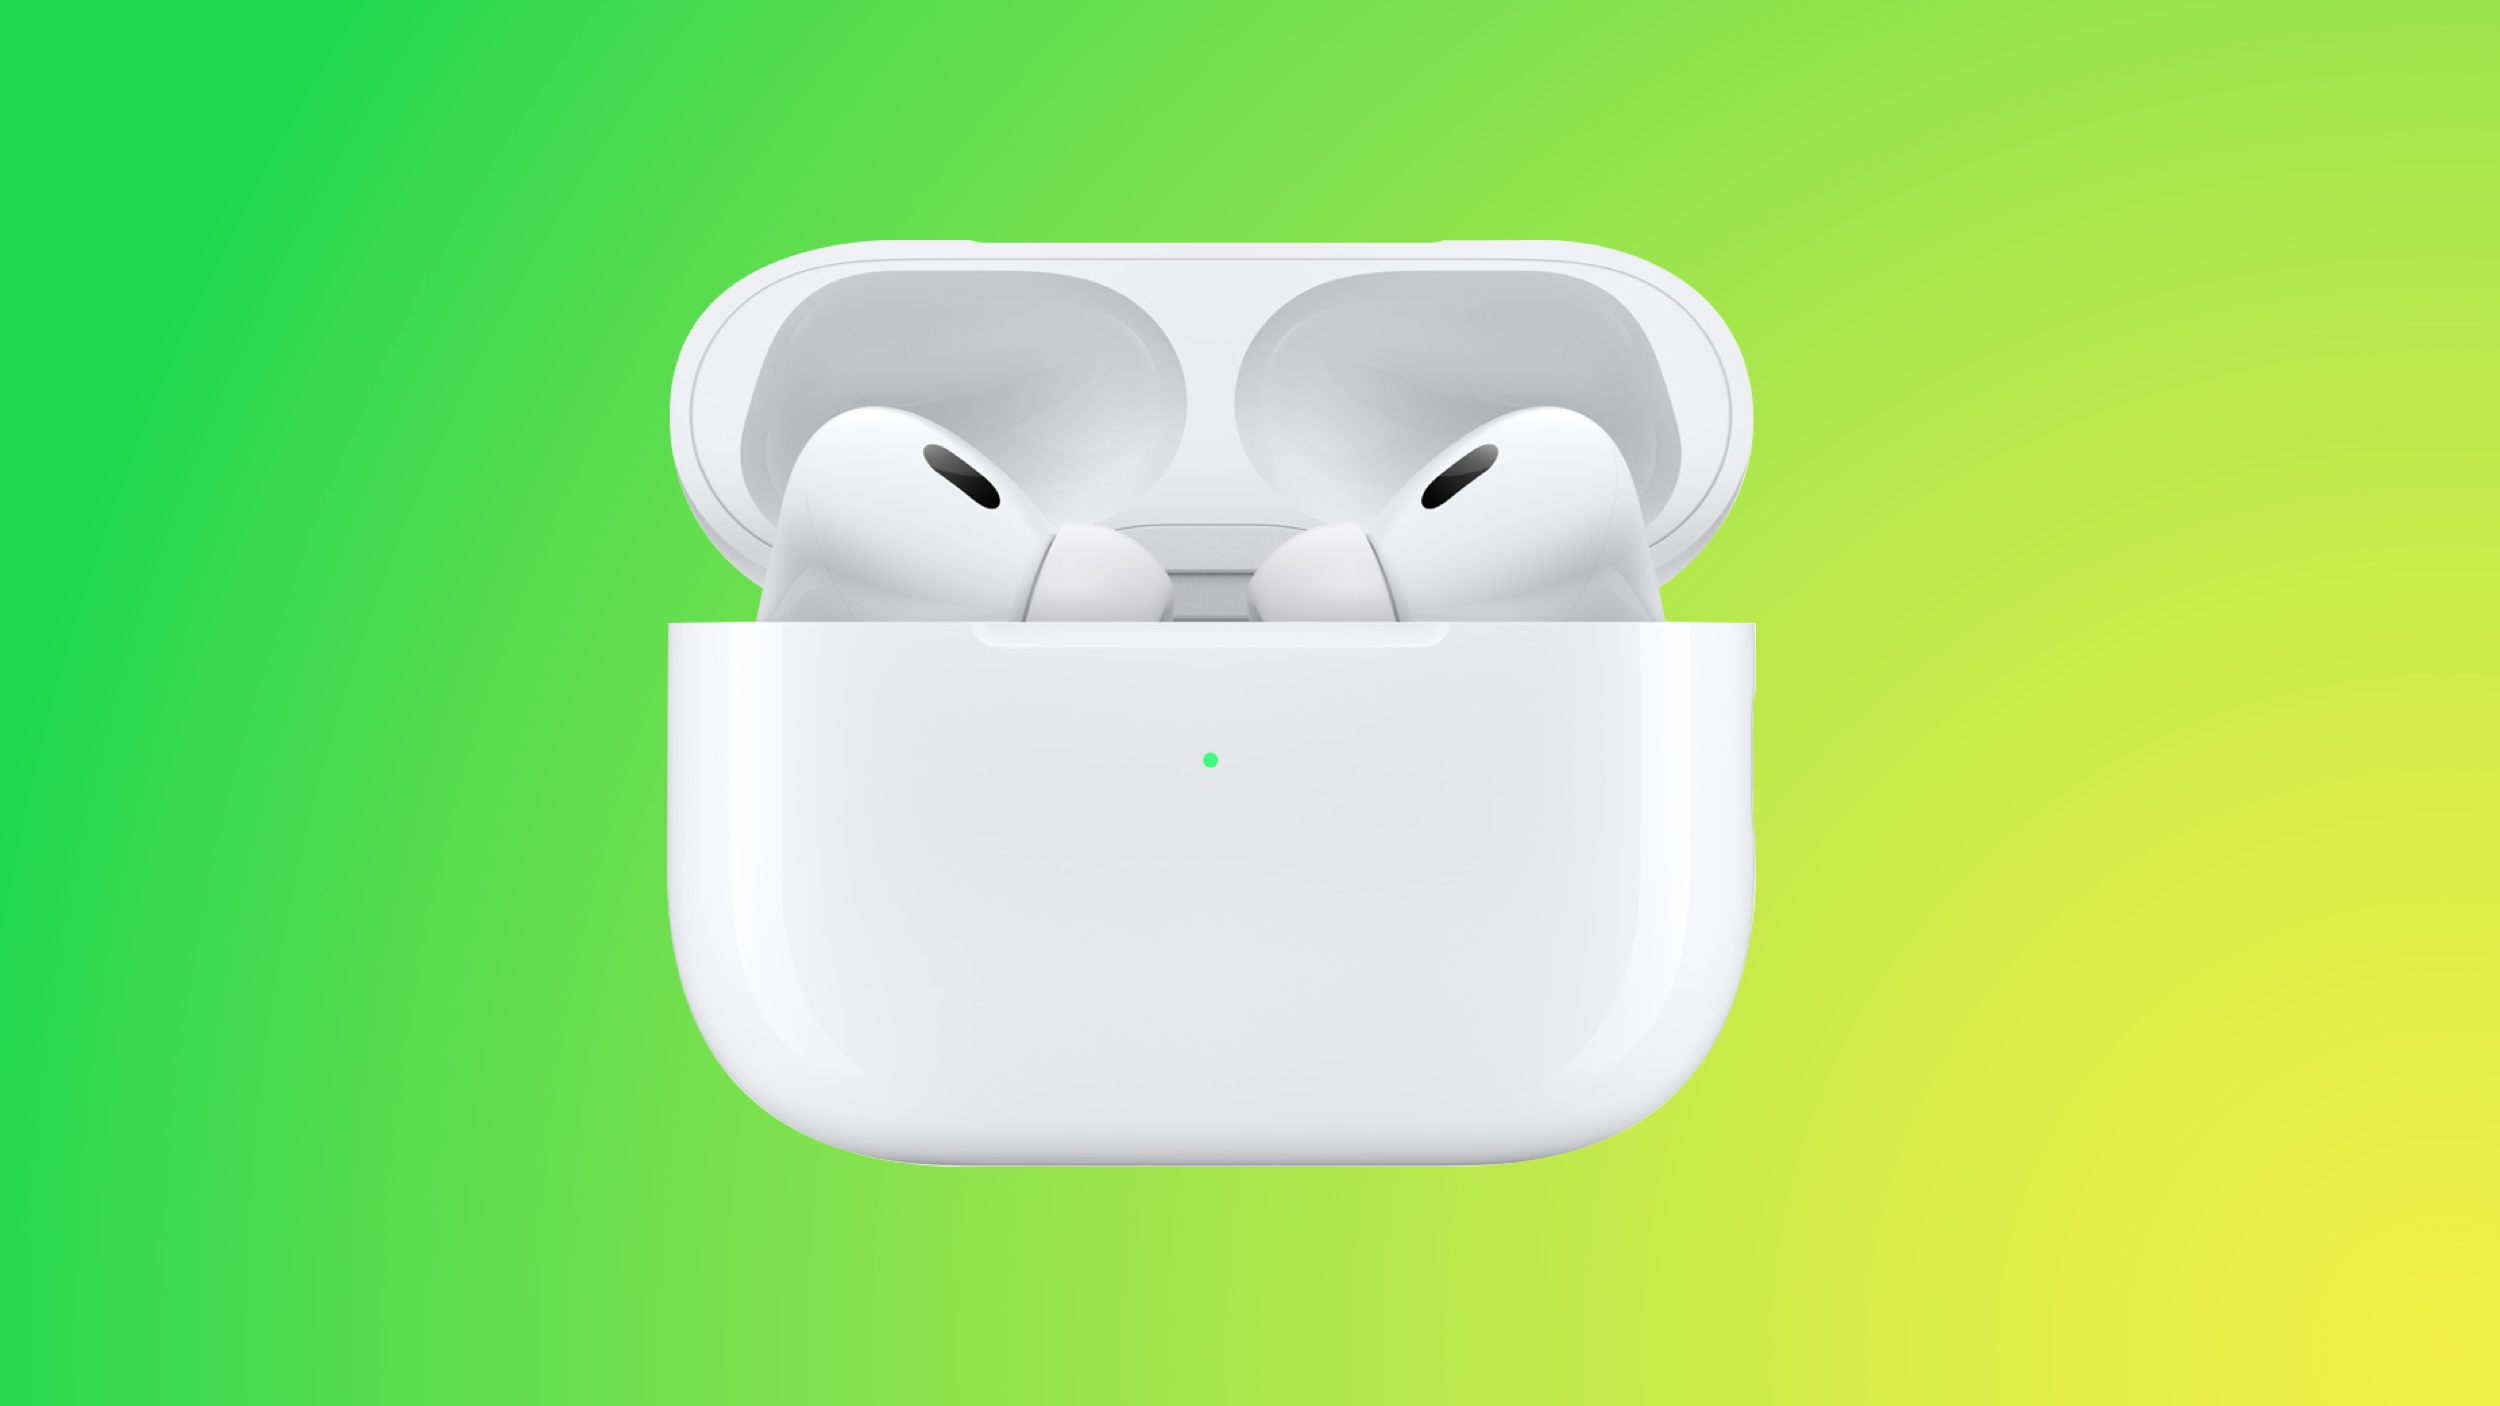 airpods pro 2 green